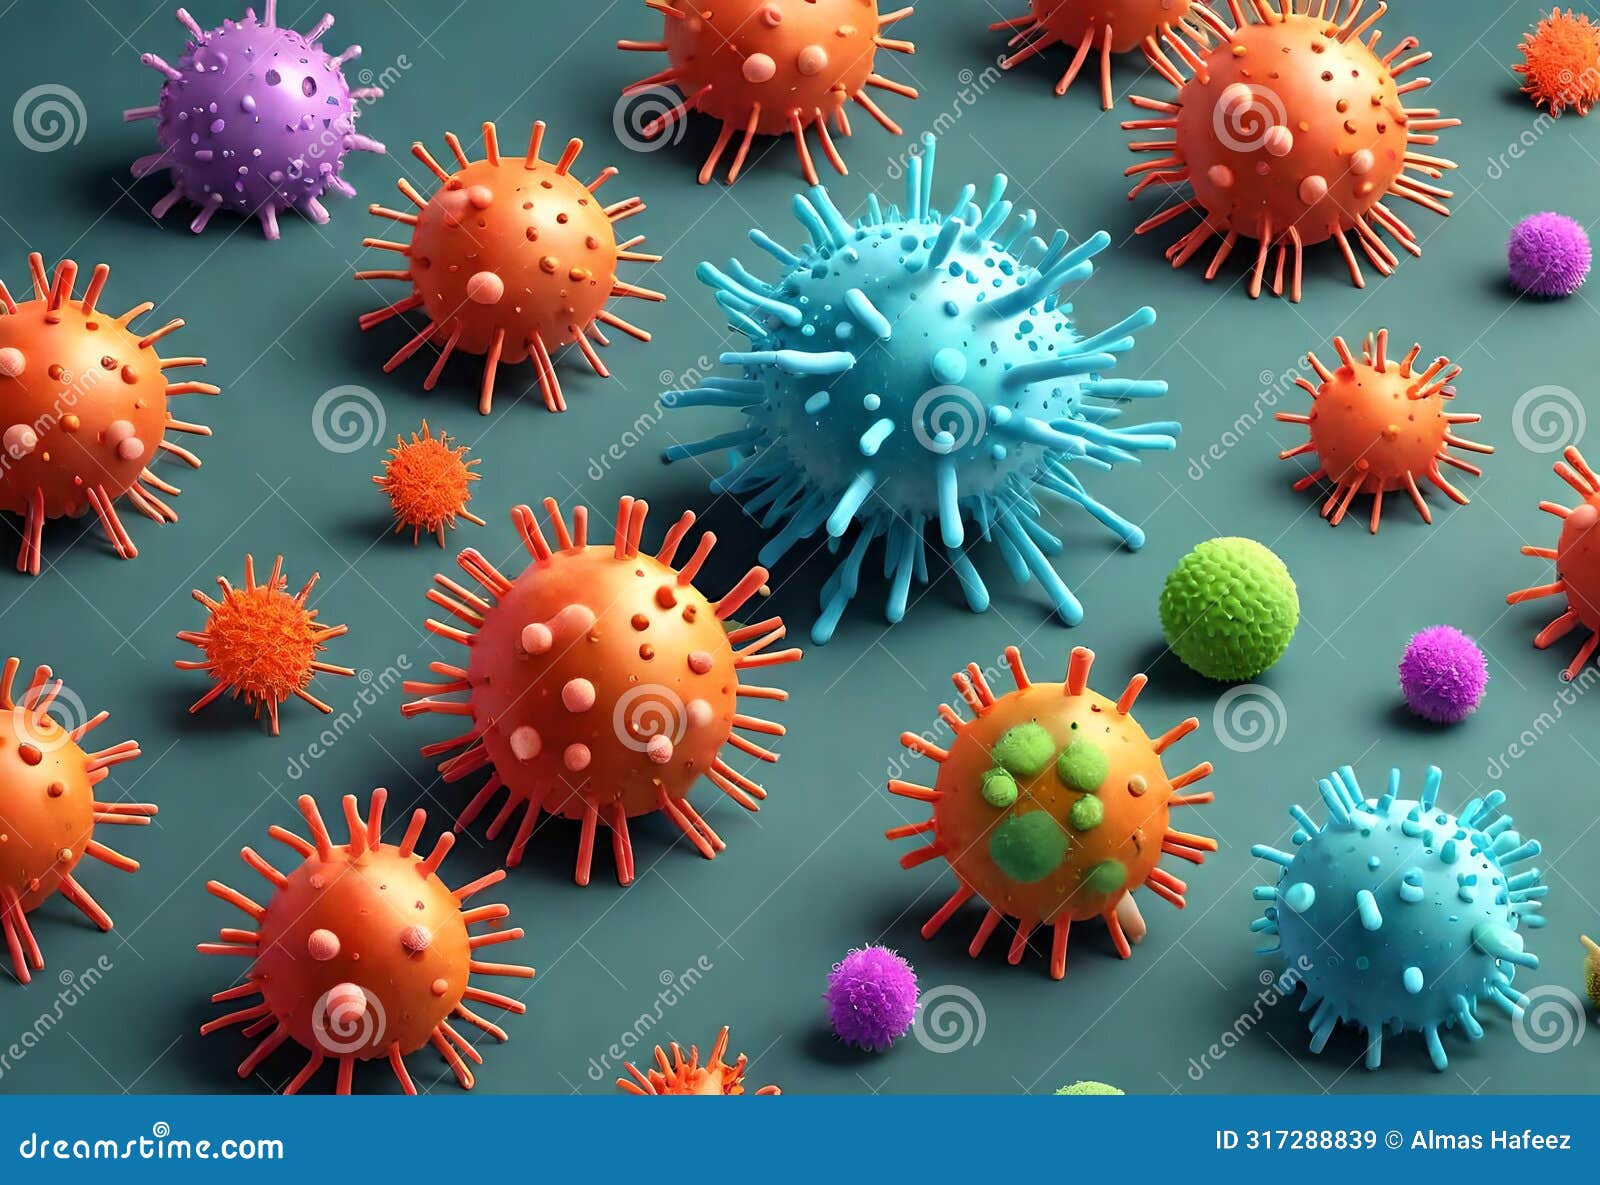 corona virus microorganisms in abstract biological background